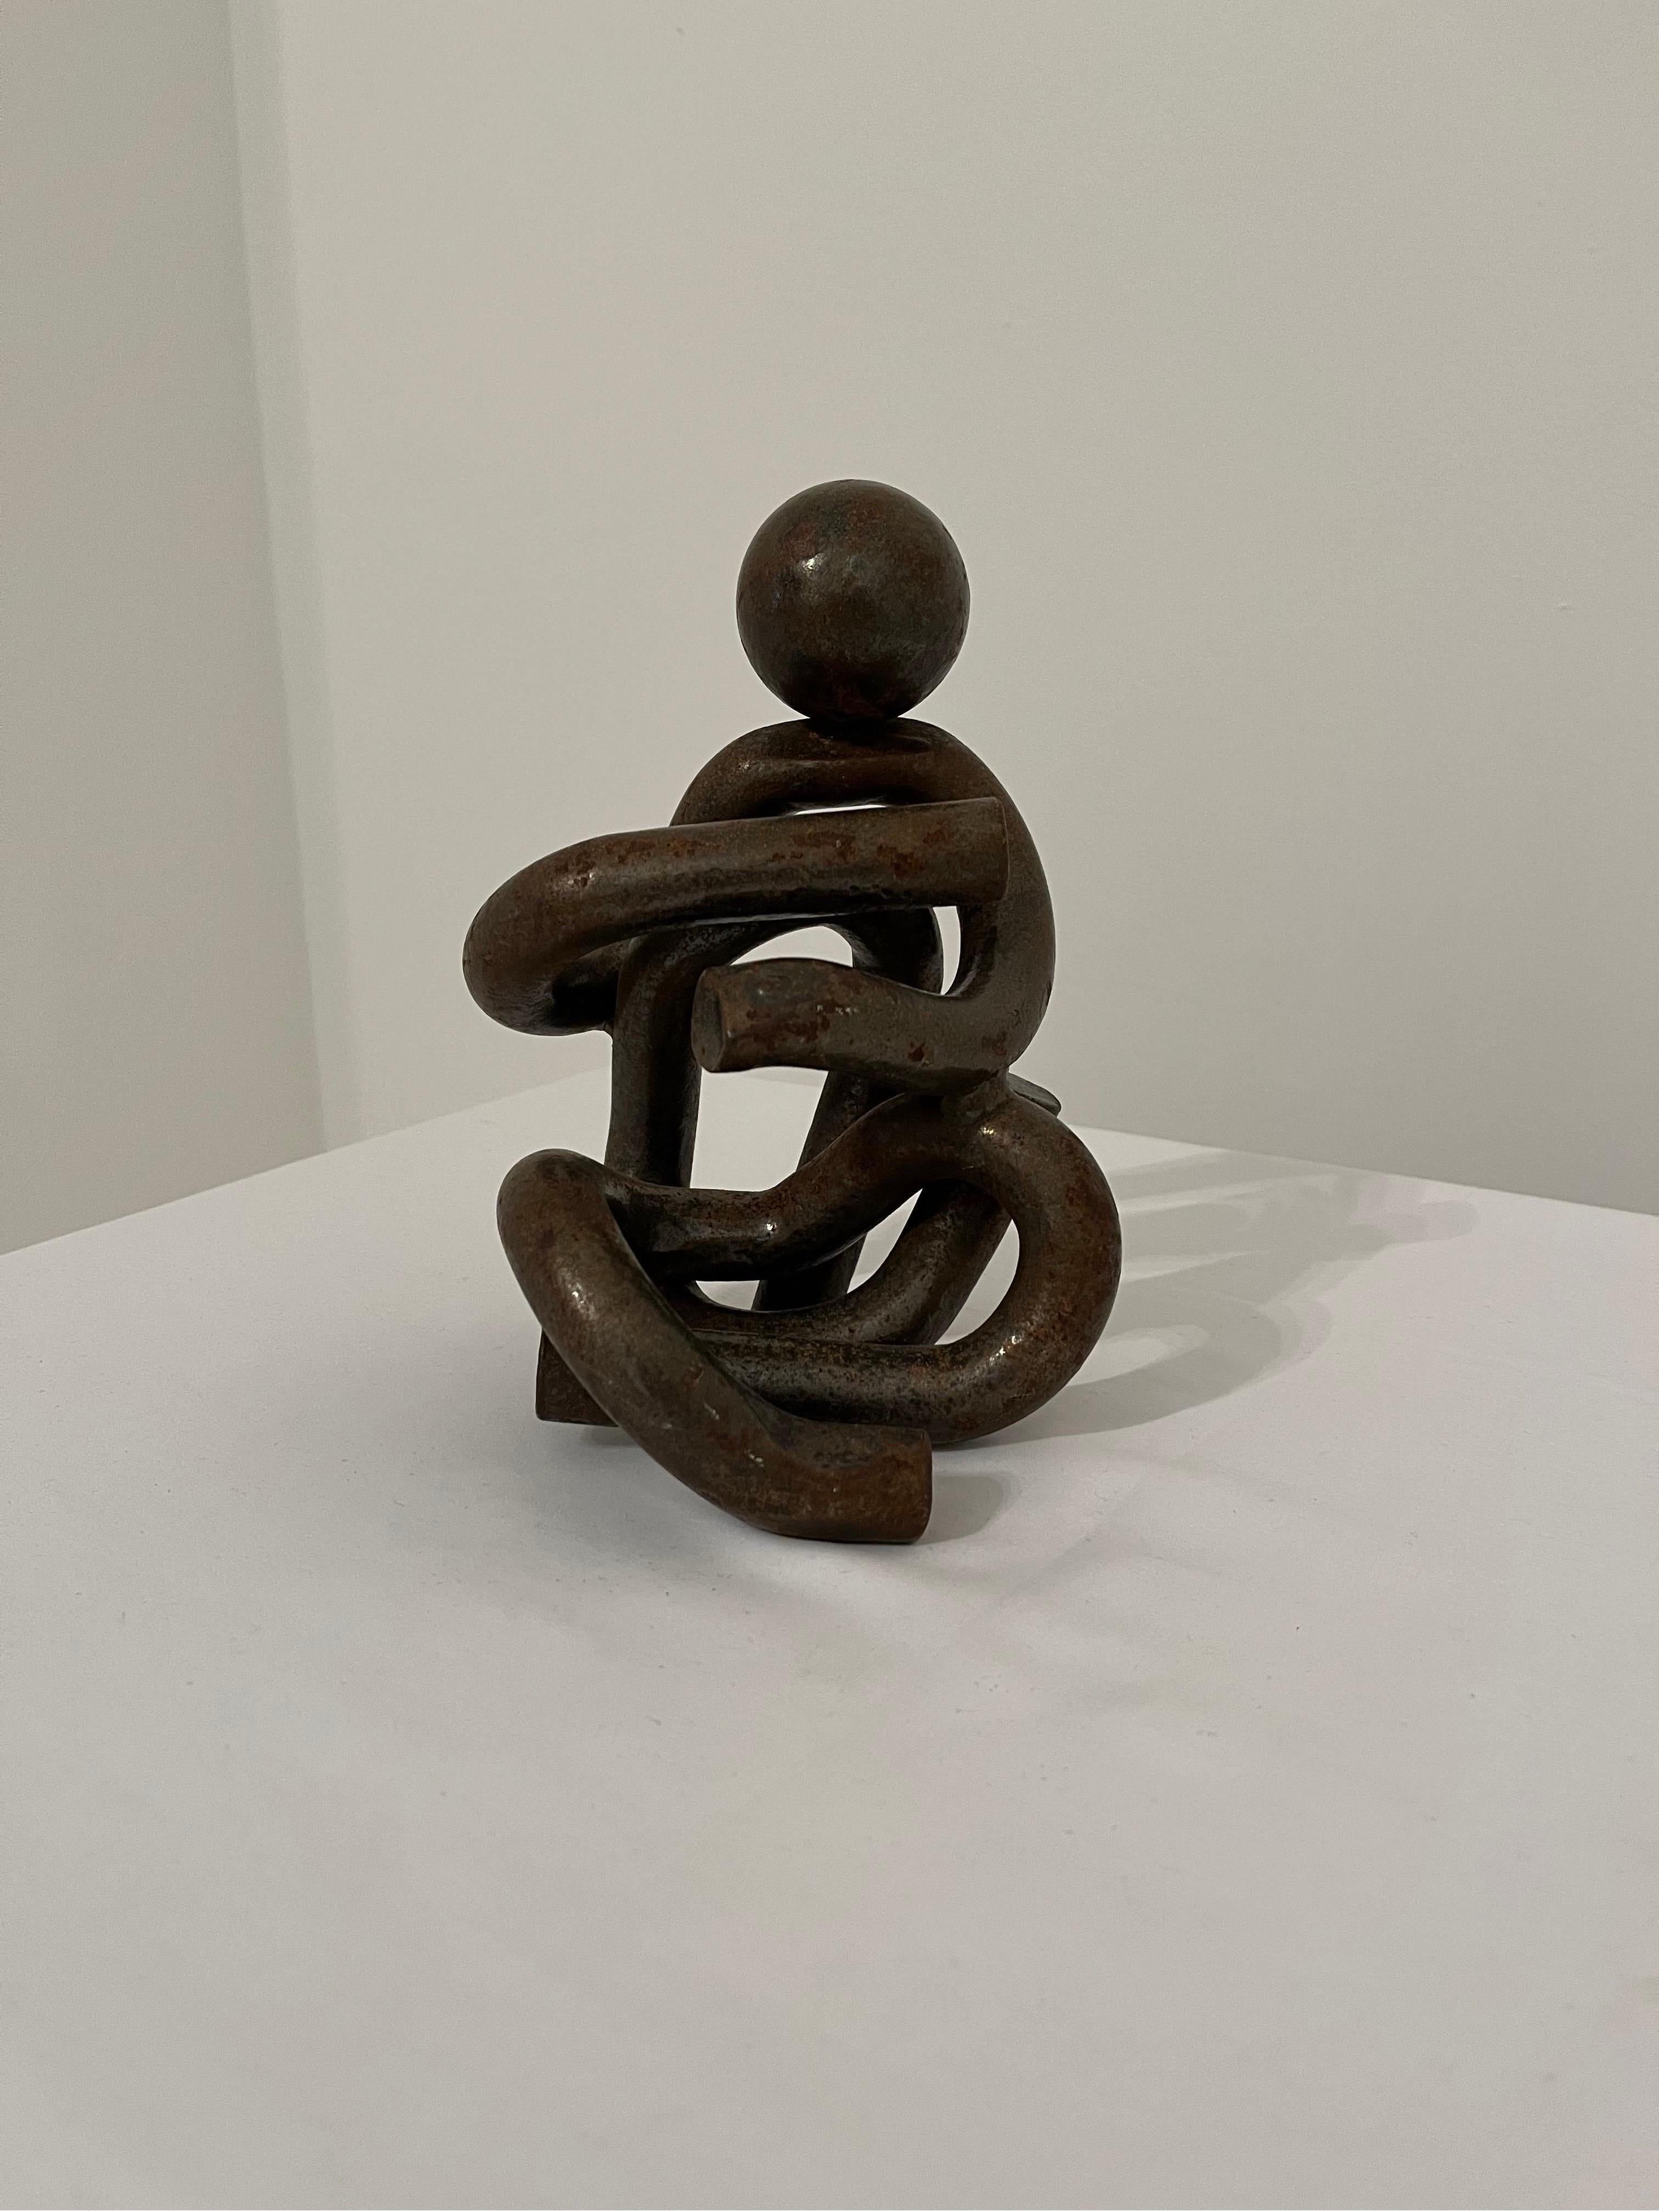 Sculptural lacquered steel seated figure. Condition as shown with heavy wear. Looks great as a shelf piece, bookend or doorstop. Great style perfect for the post-modern home. 
